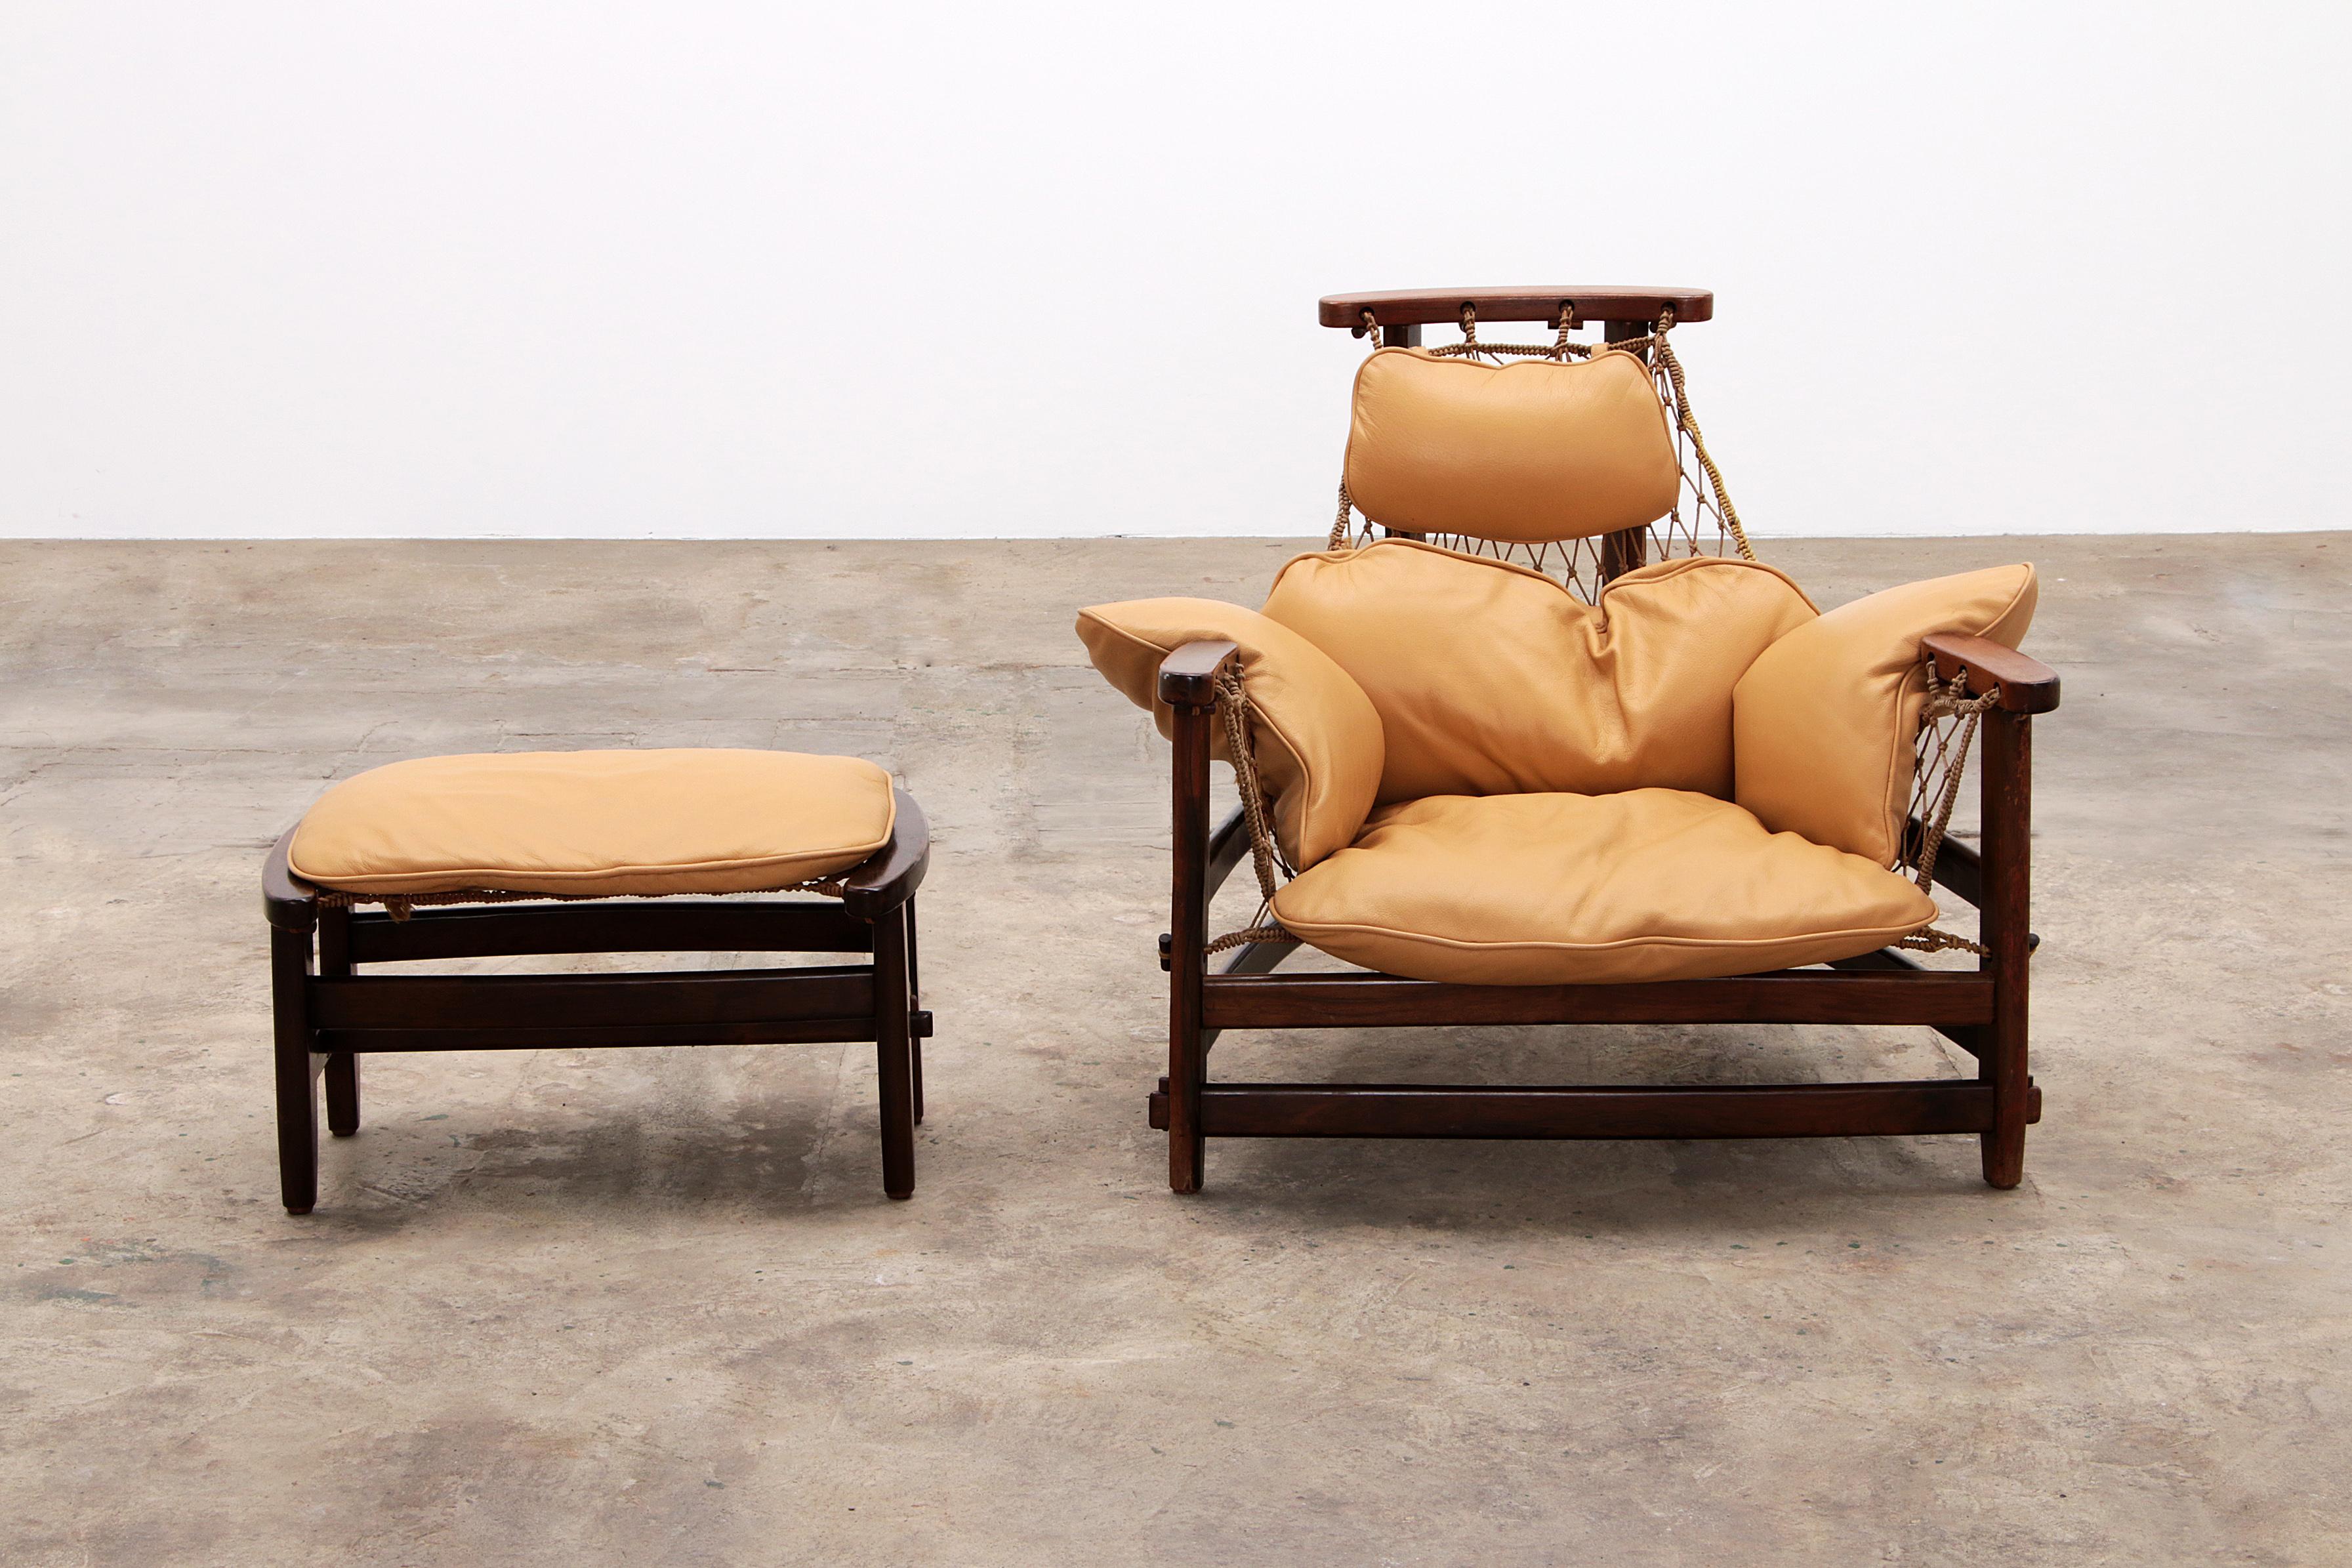 Brazilian Jean Gillon 'Jangada' lounge chair and ottoman in tropical wood and leather.